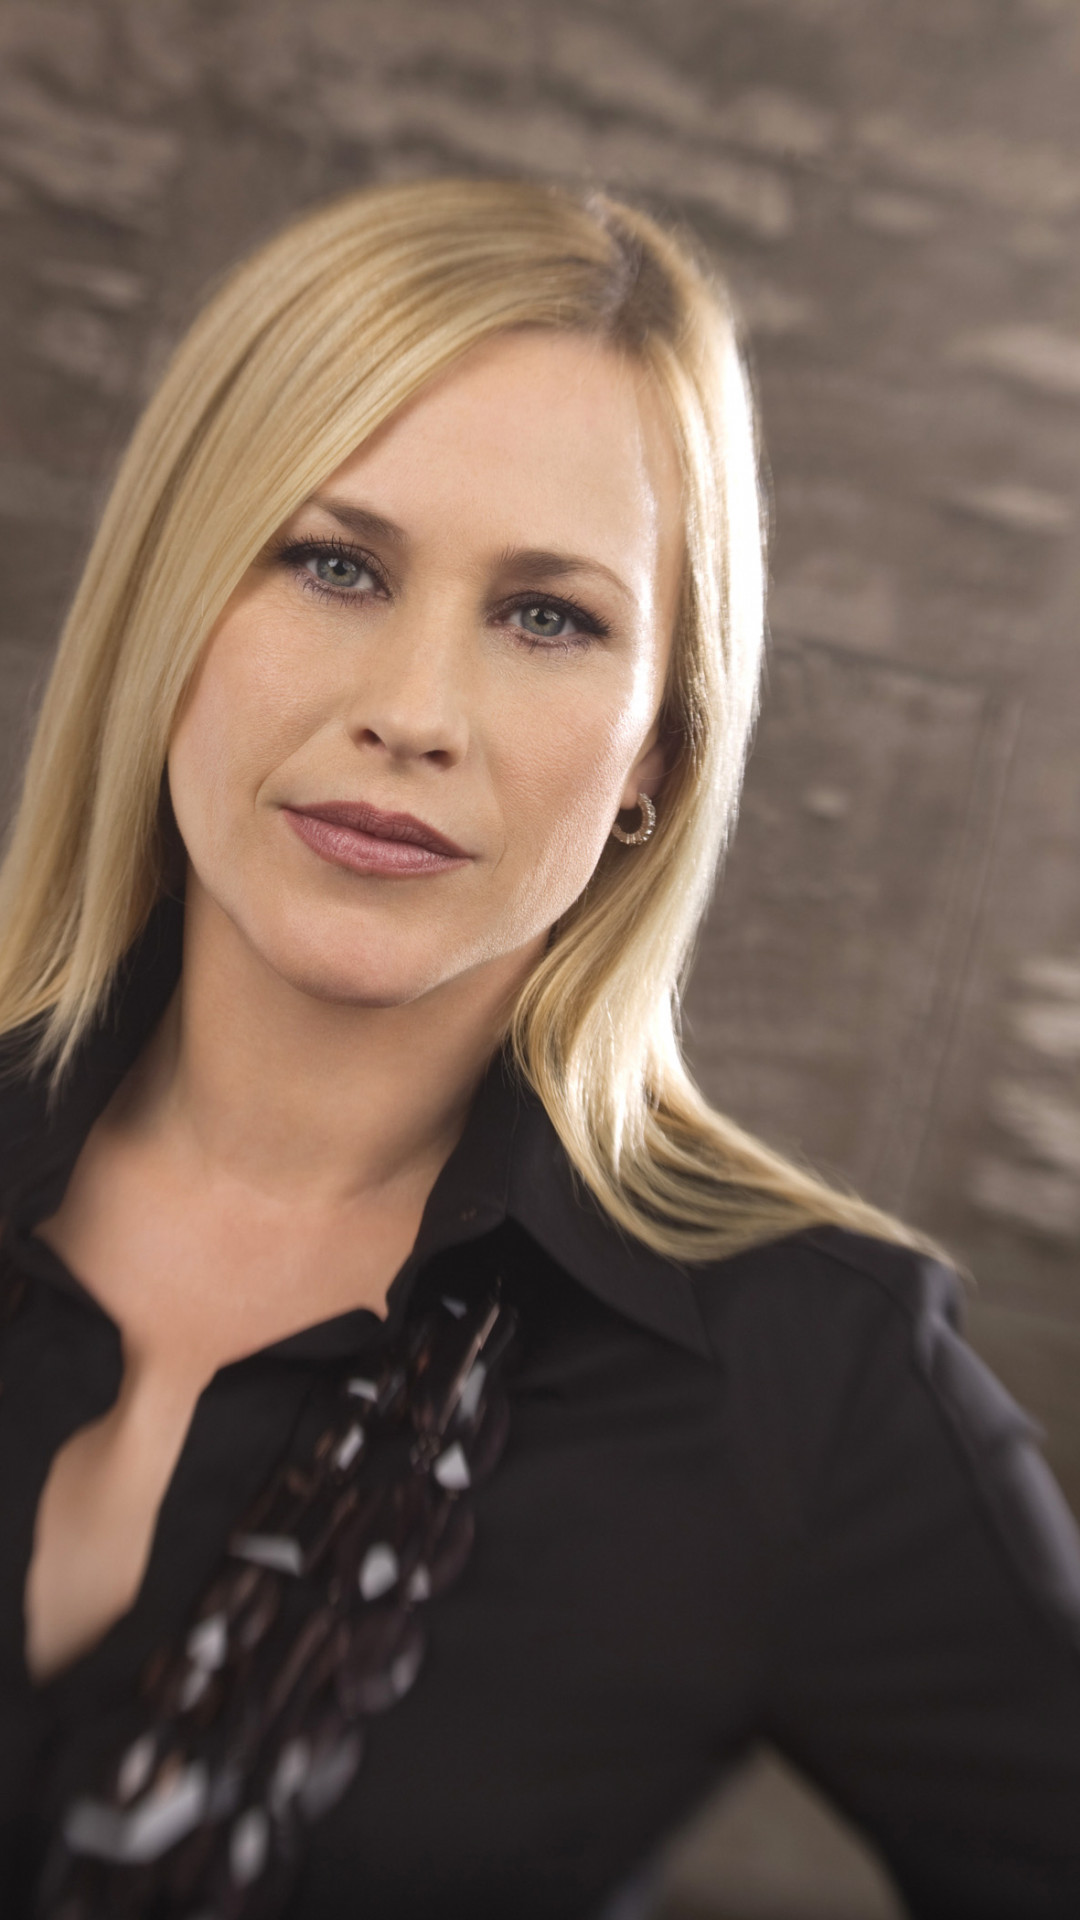 Wallpaper Patricia Arquette, Most Popular Celebs in 2015, actress, Celebrities #37041080 x 1920